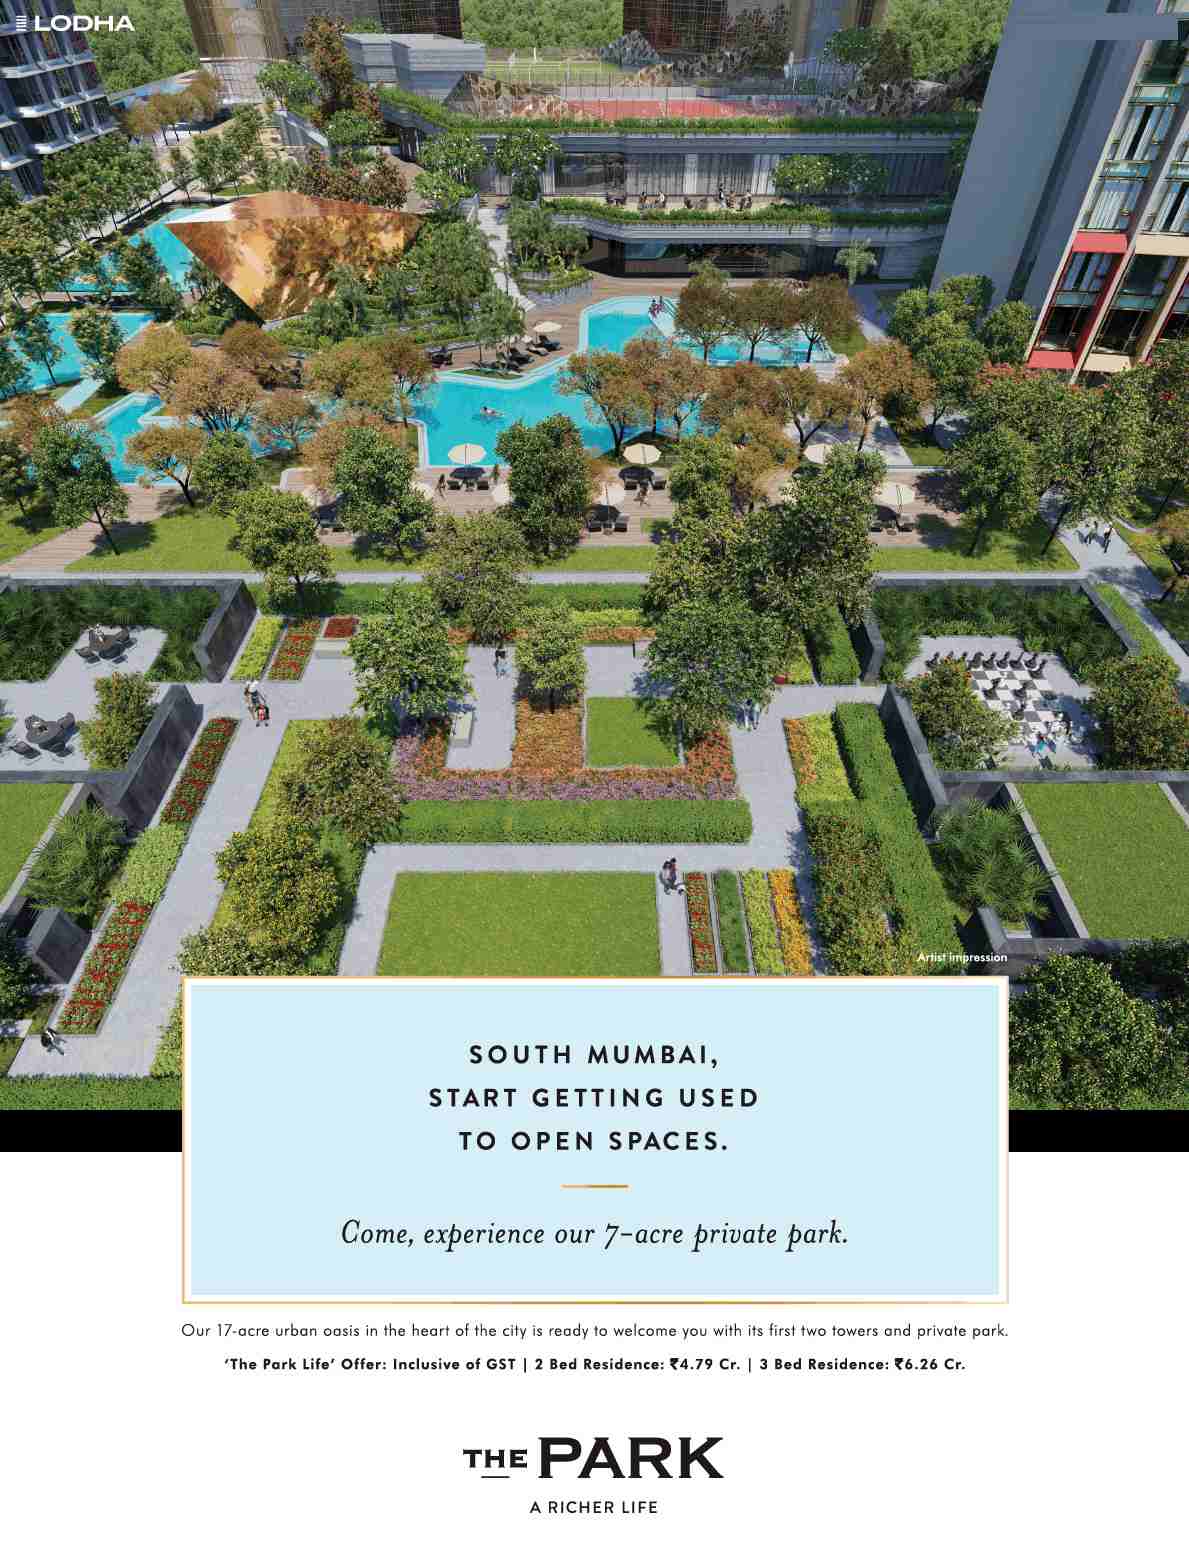 Experience 7 acre private park at Lodha The Park in Worli, Mumbai Update